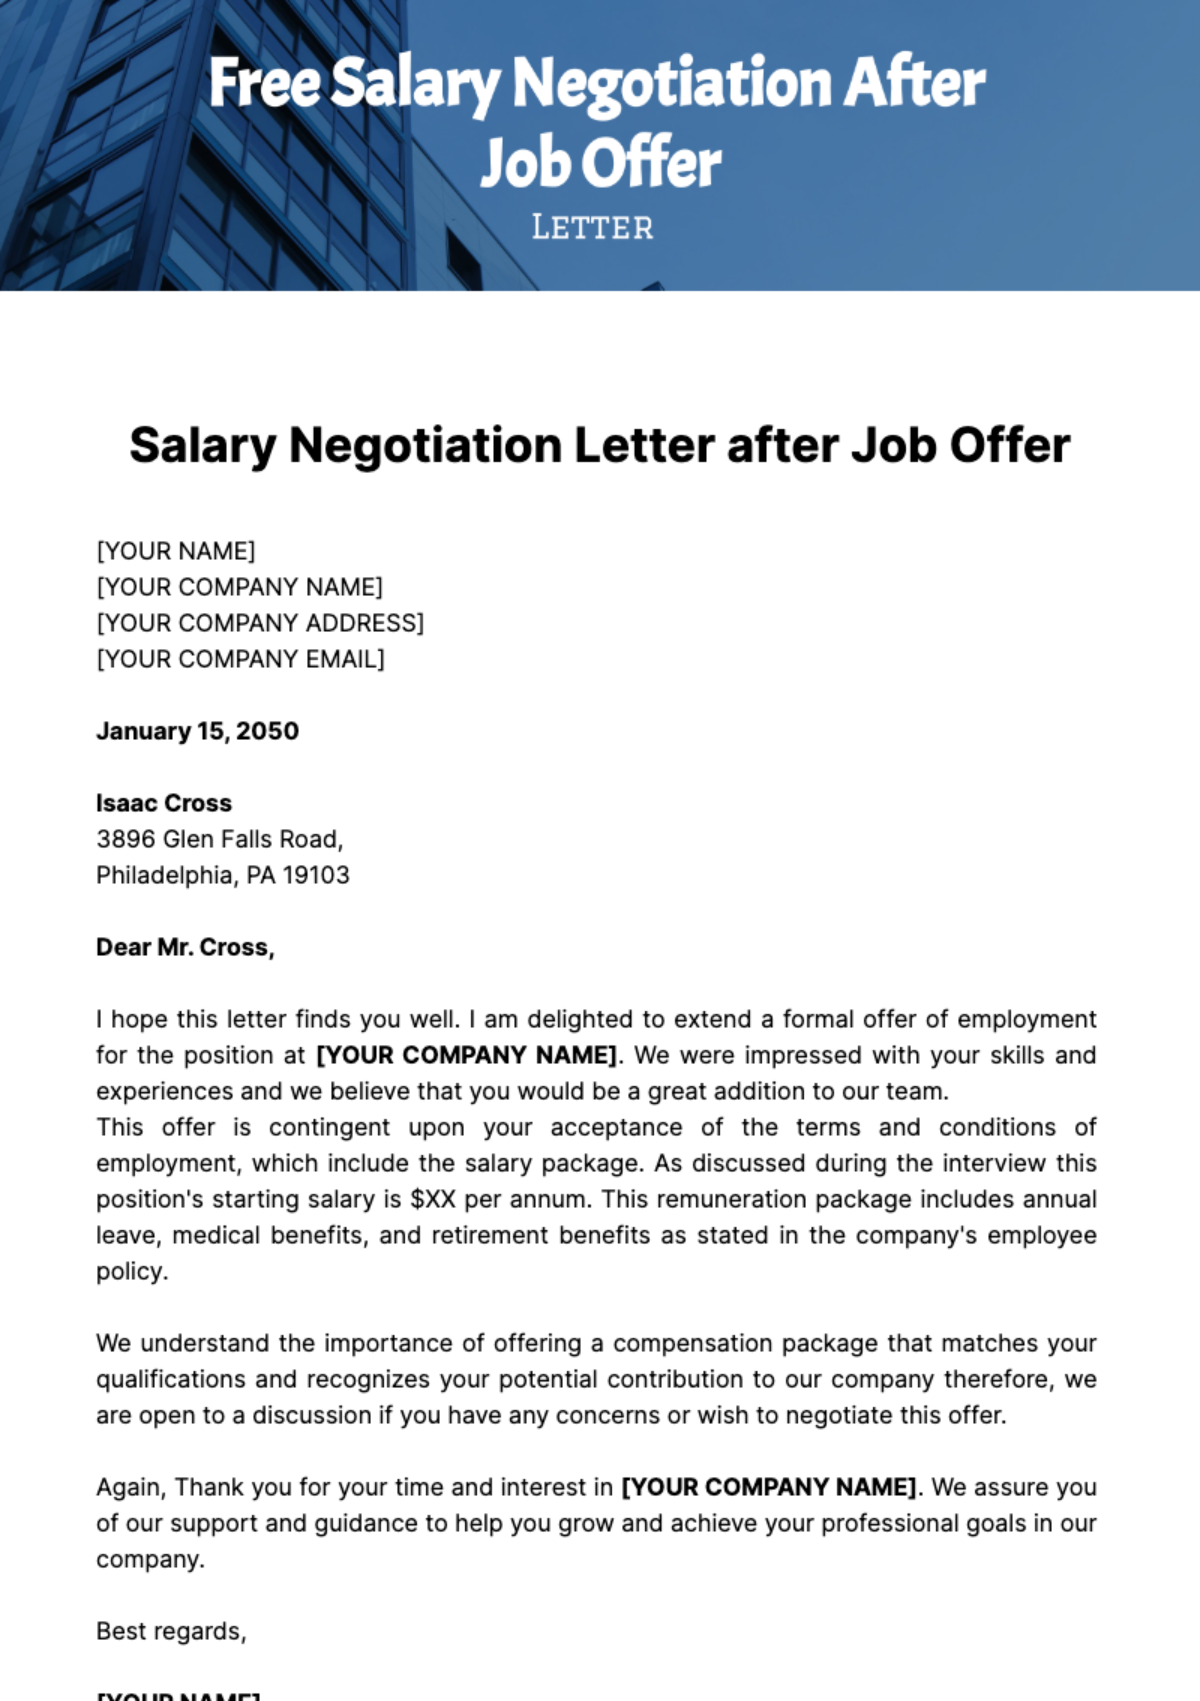 Free Salary Negotiation Letter after Job Offer Template